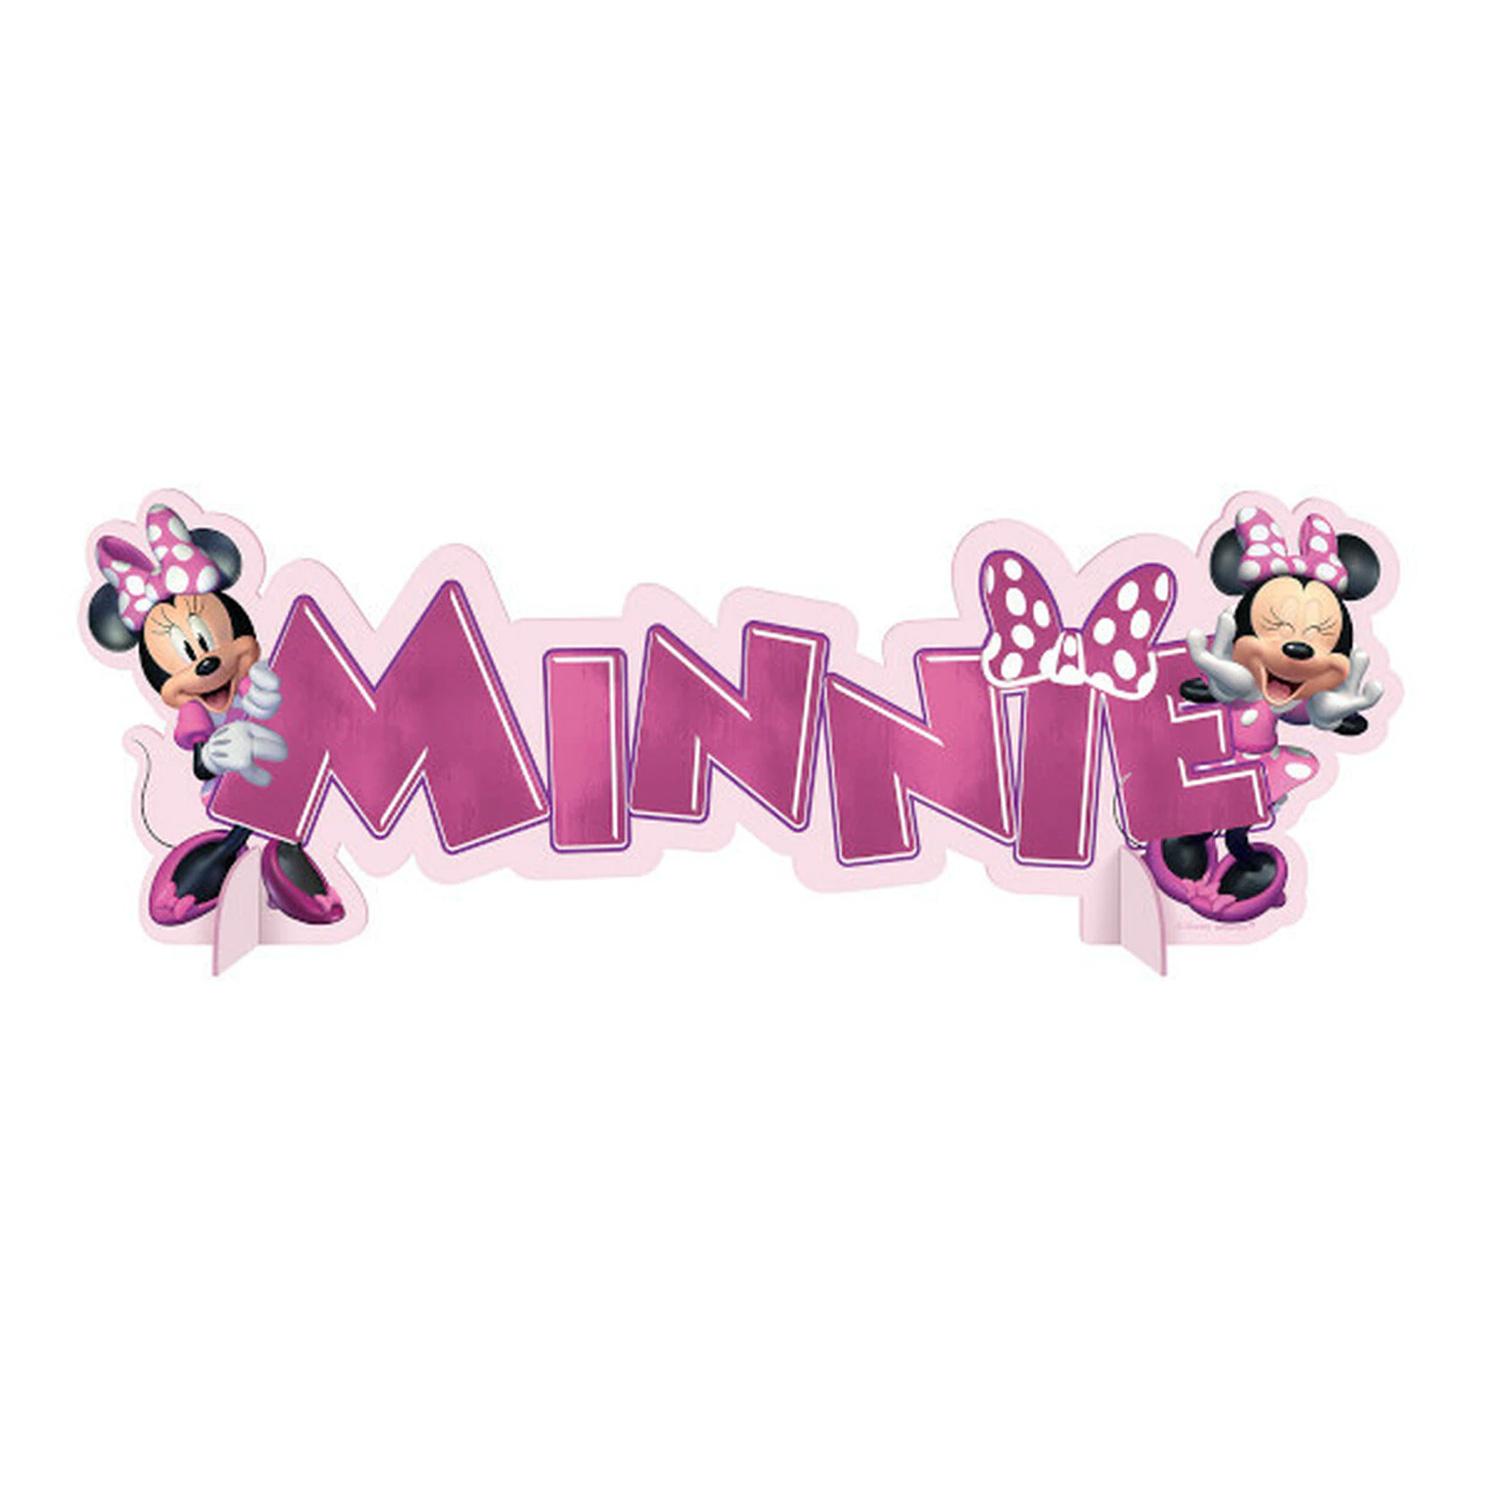 Disney Minnie Mouse Forever Hot Stamped Table Decoration Party Favors - Party Centre